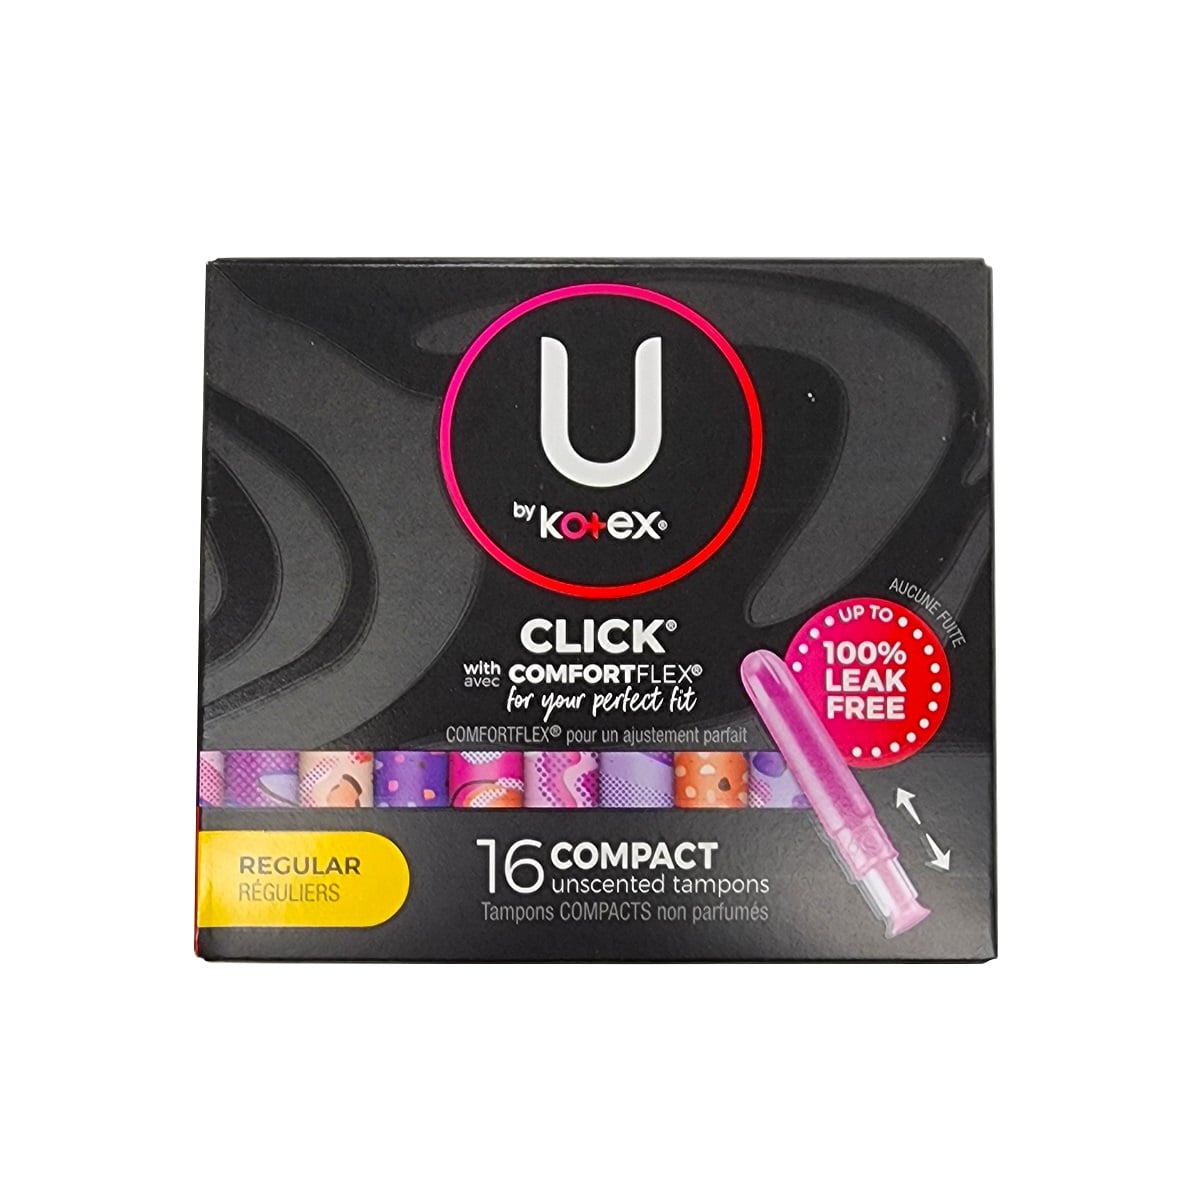 Product label for U by Kotex Click with ComfortFlex Regular Tampons (16 count)